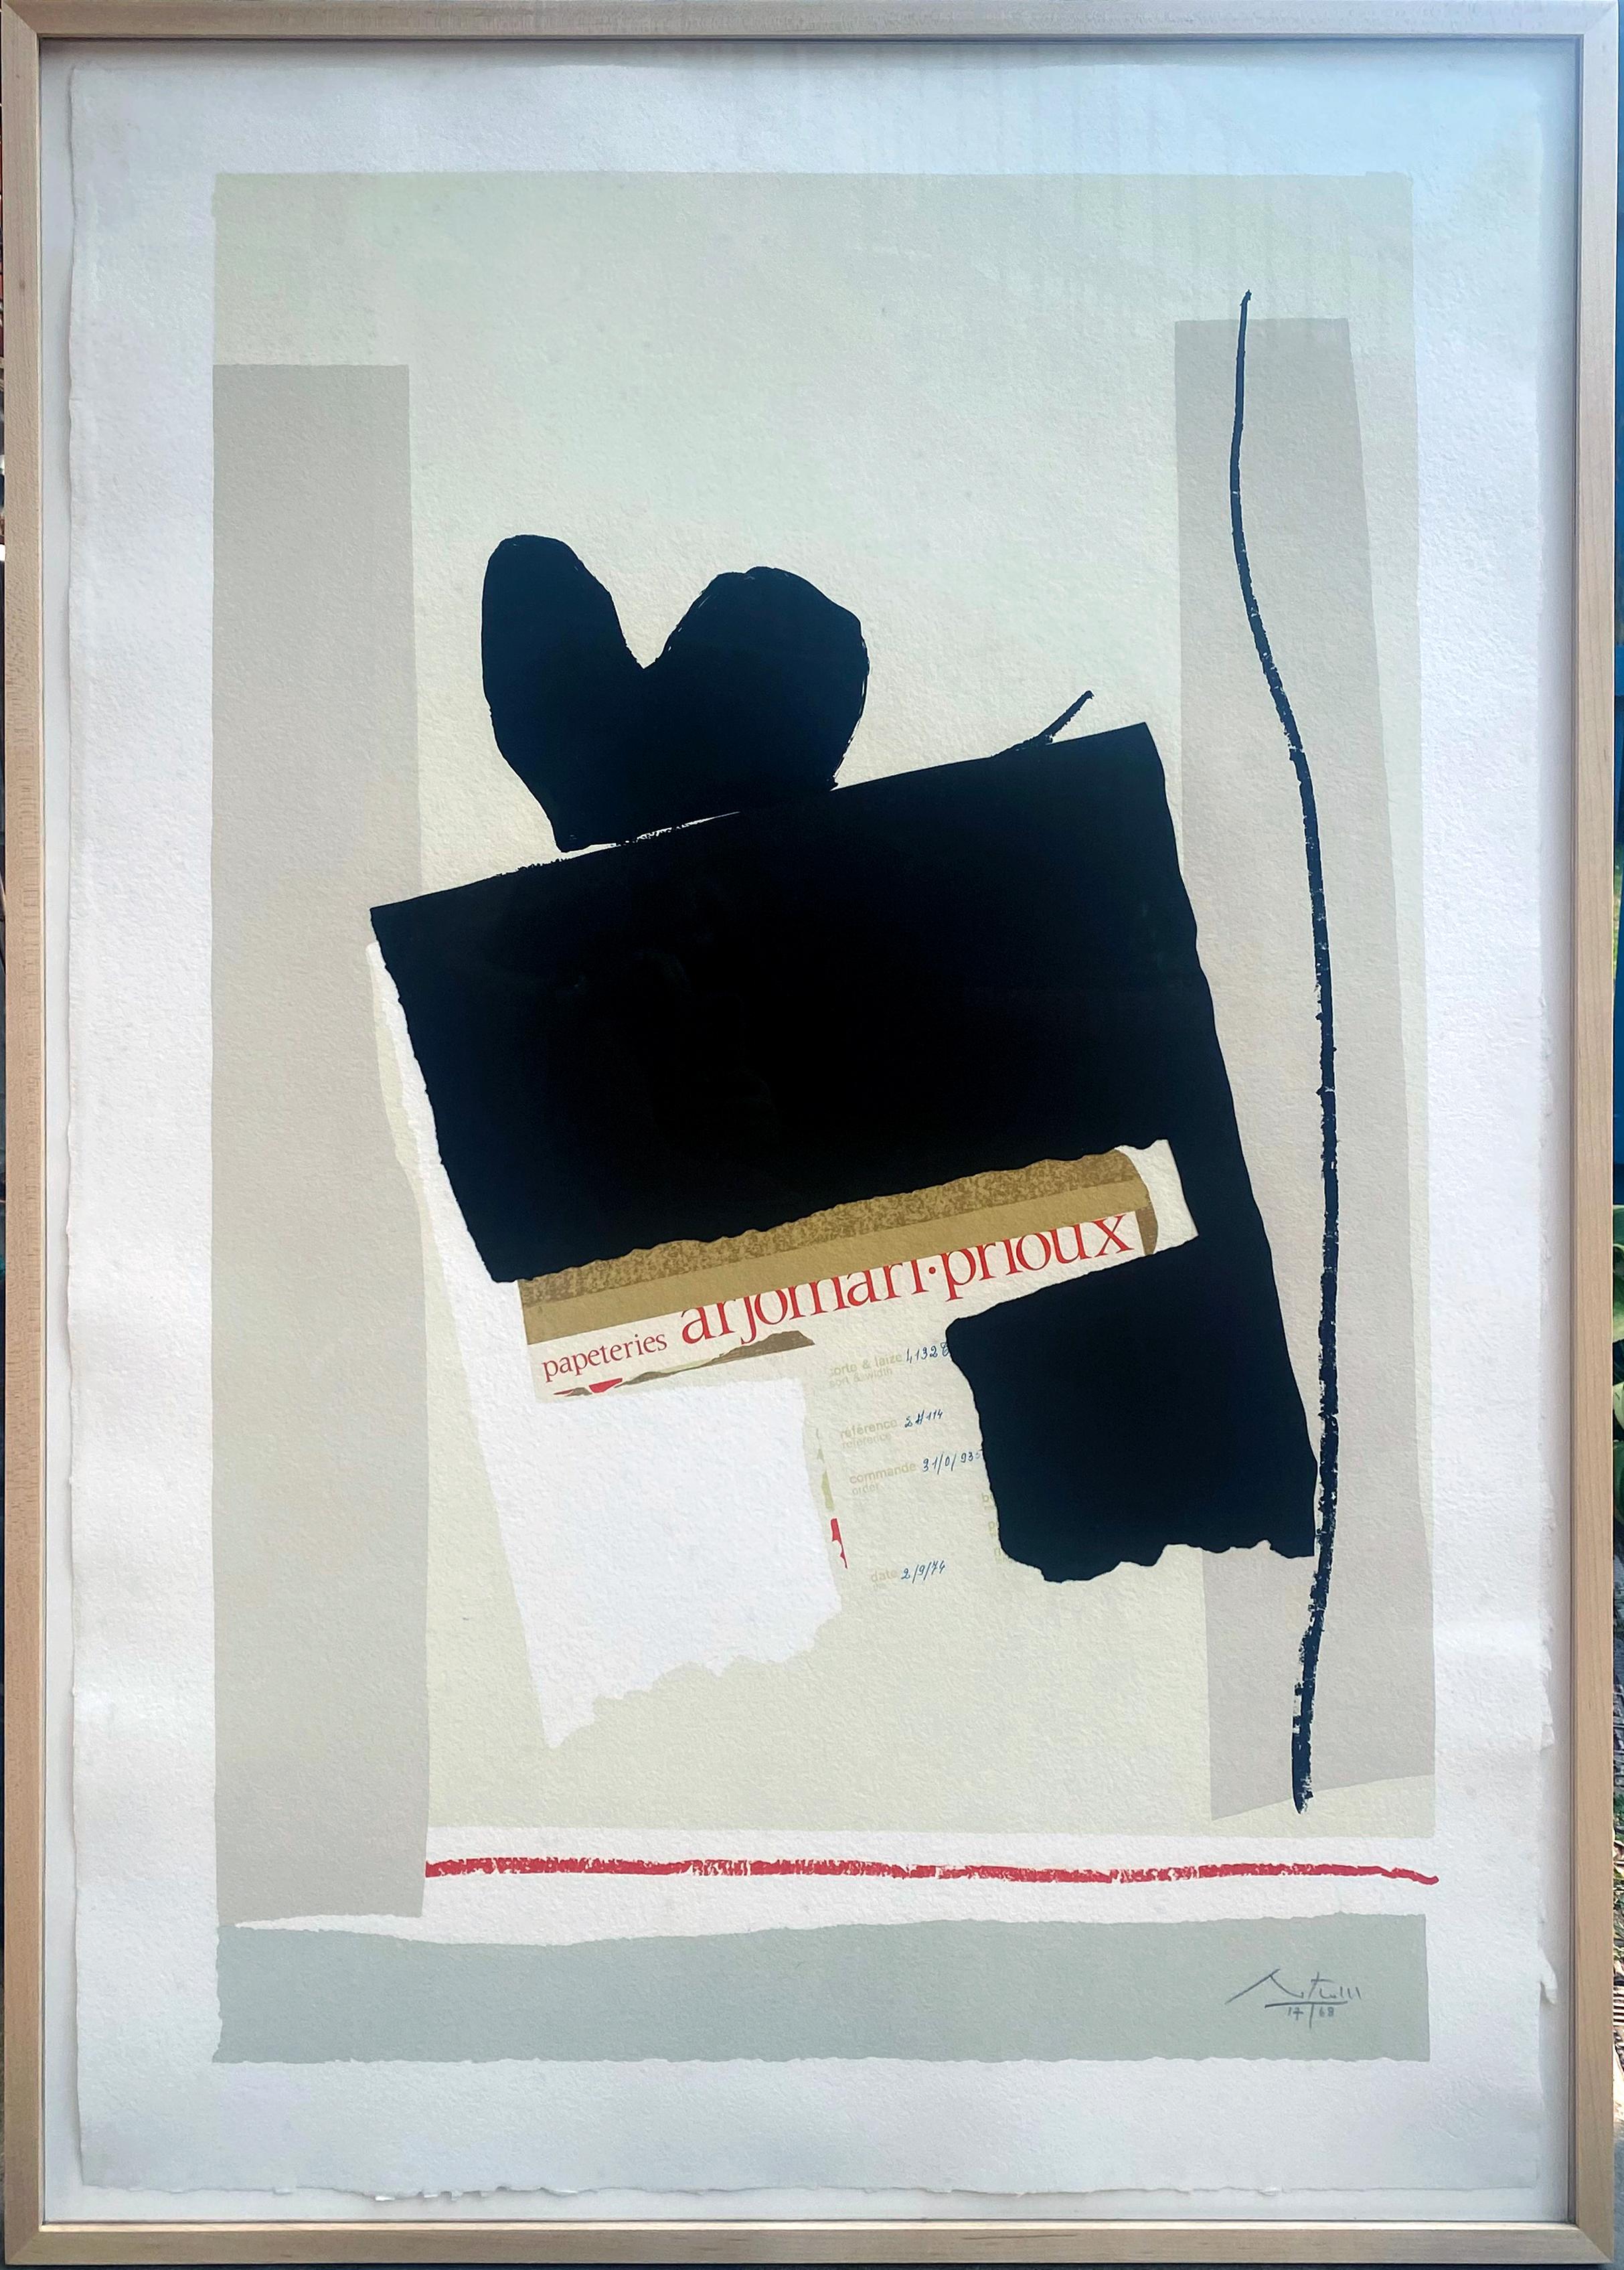 Robert Motherwell Abstract Print - America - La France variations IV, 17/68 color lithograph with collage